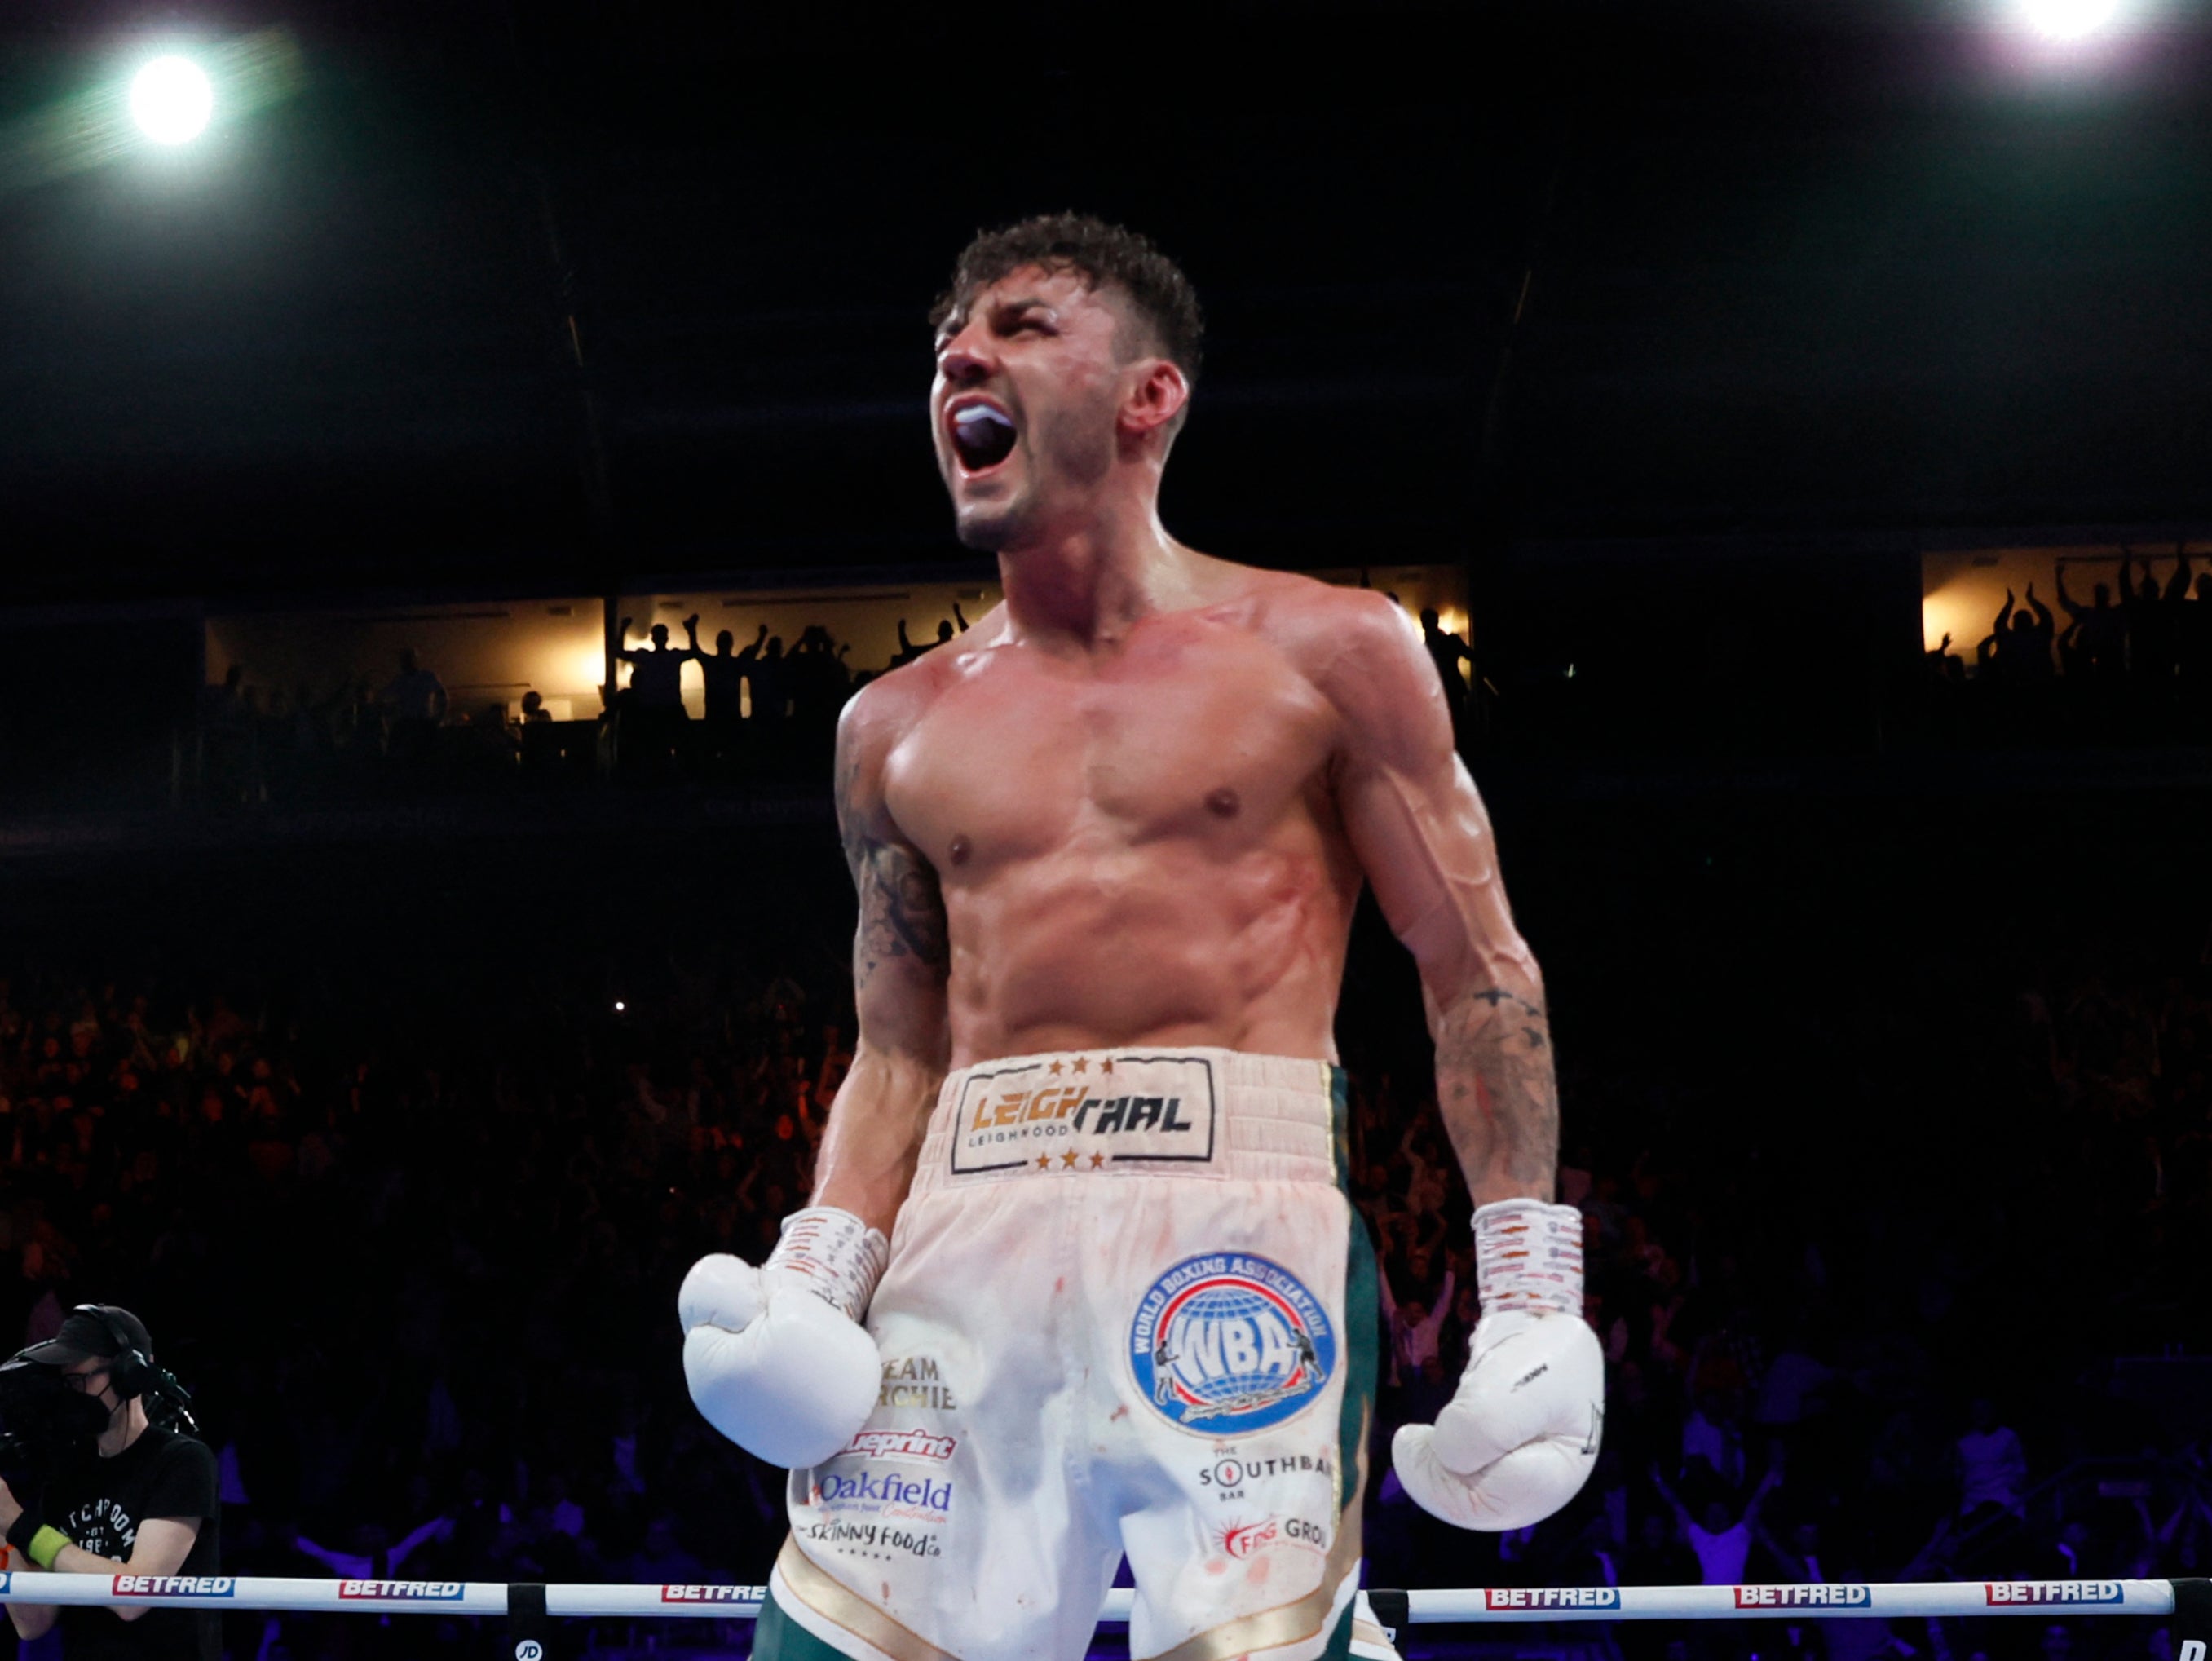 Wood vs Conlan LIVE Fight stream, latest updates and result tonight The Independent